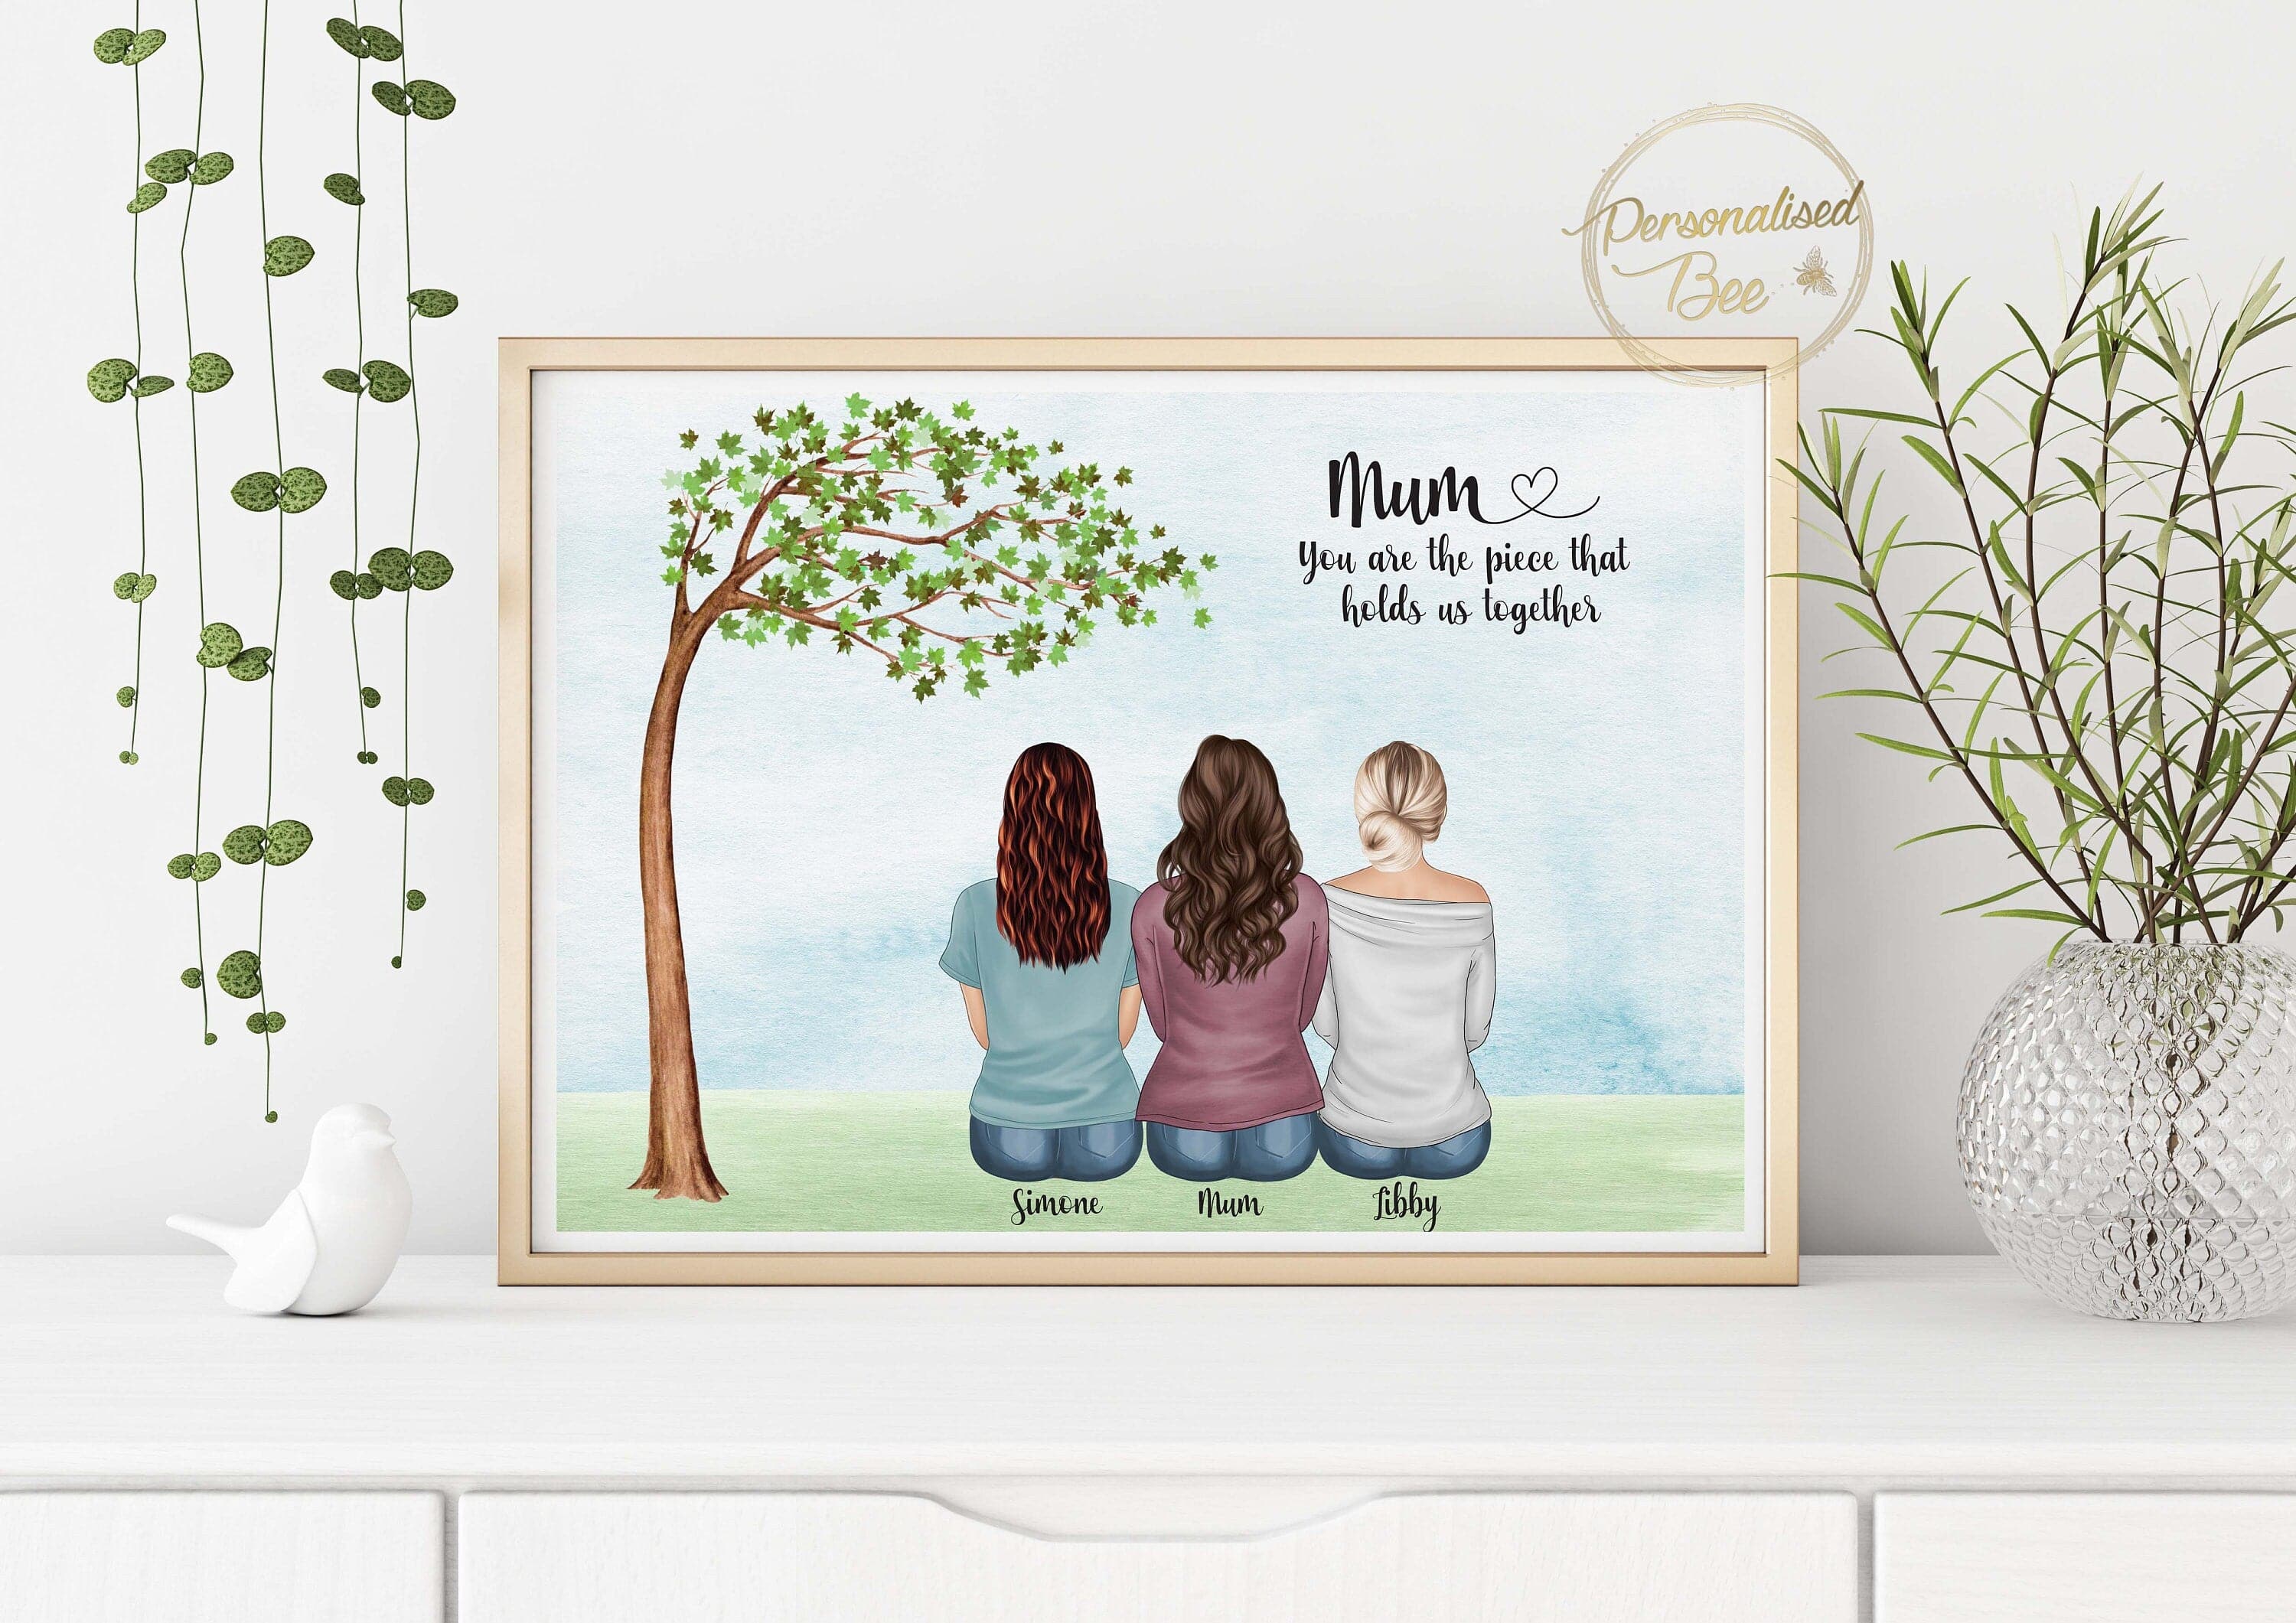 Personalised Gifts for Mother, Mother's Day Gift from Daughter, Custom Illustration Print, Mother Daughter, Gift for Grandma, Letterbox Gift